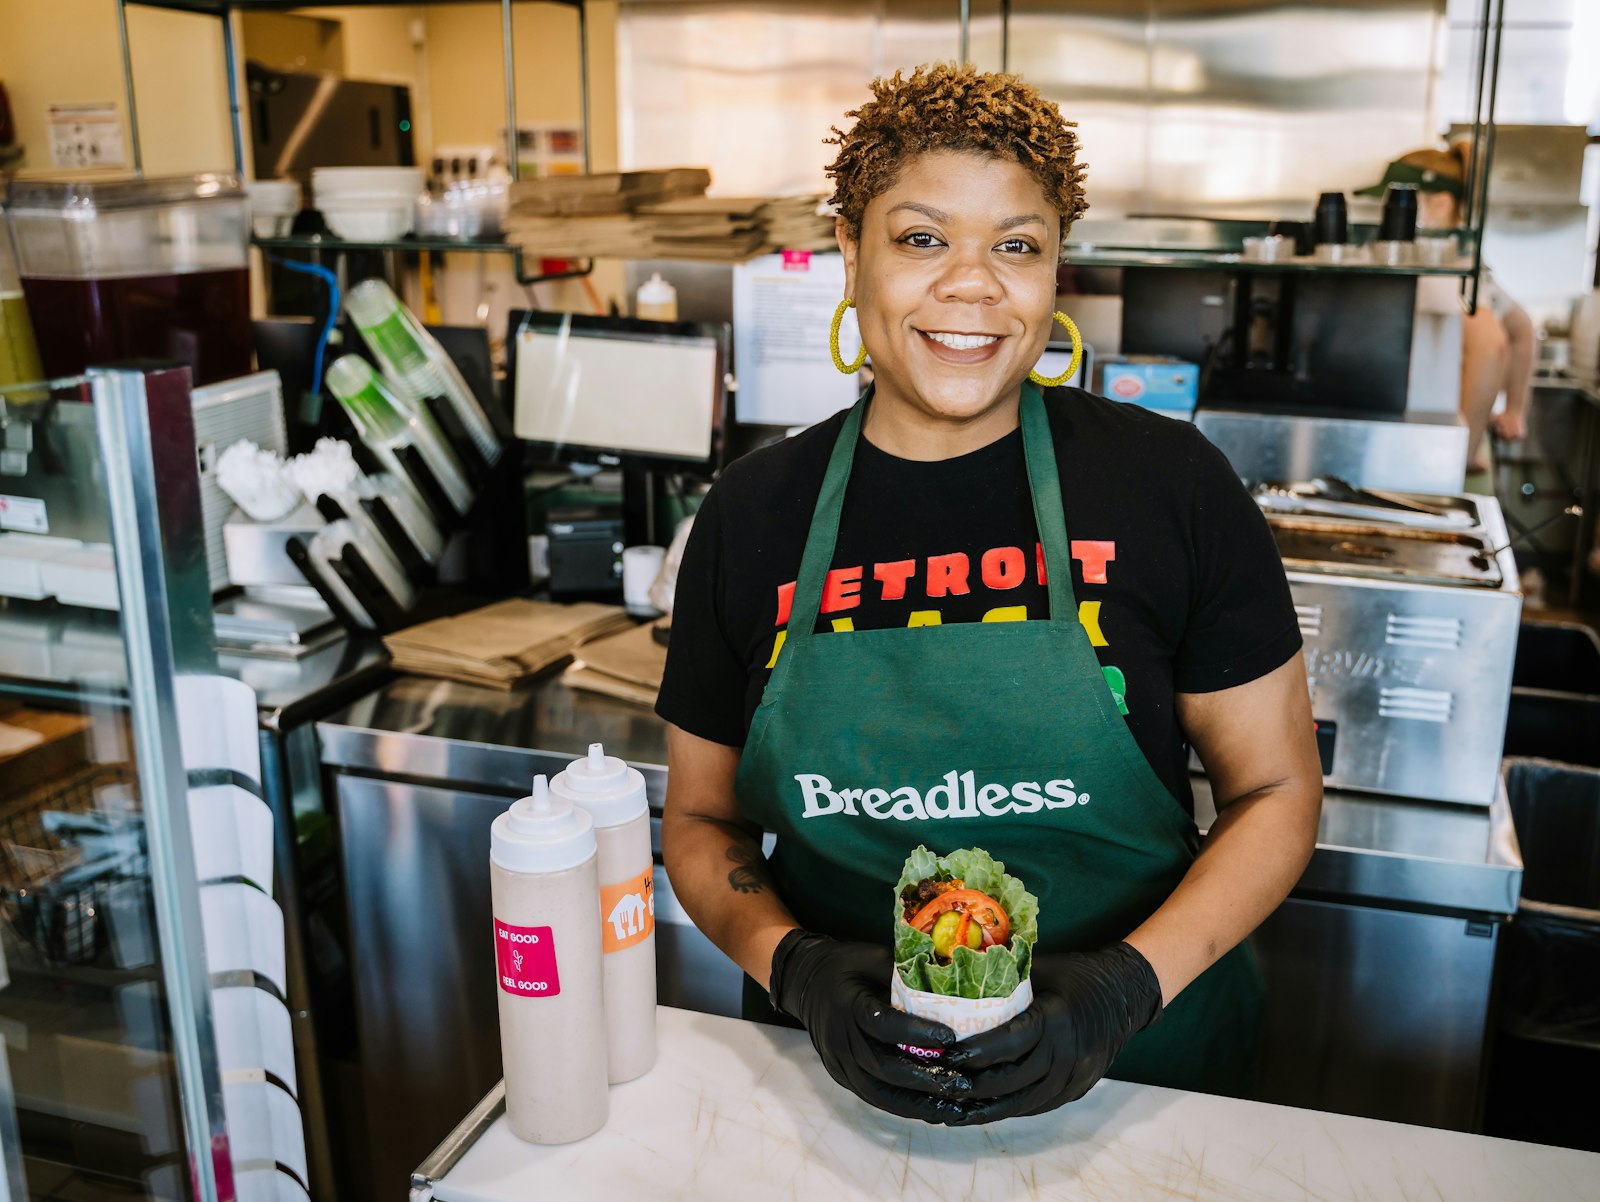 Goudia and her team decided that in addition to feeding and educating people, they wanted to use this initiative to support Black chefs, growers and farmers who had been impacted by the pandemic.